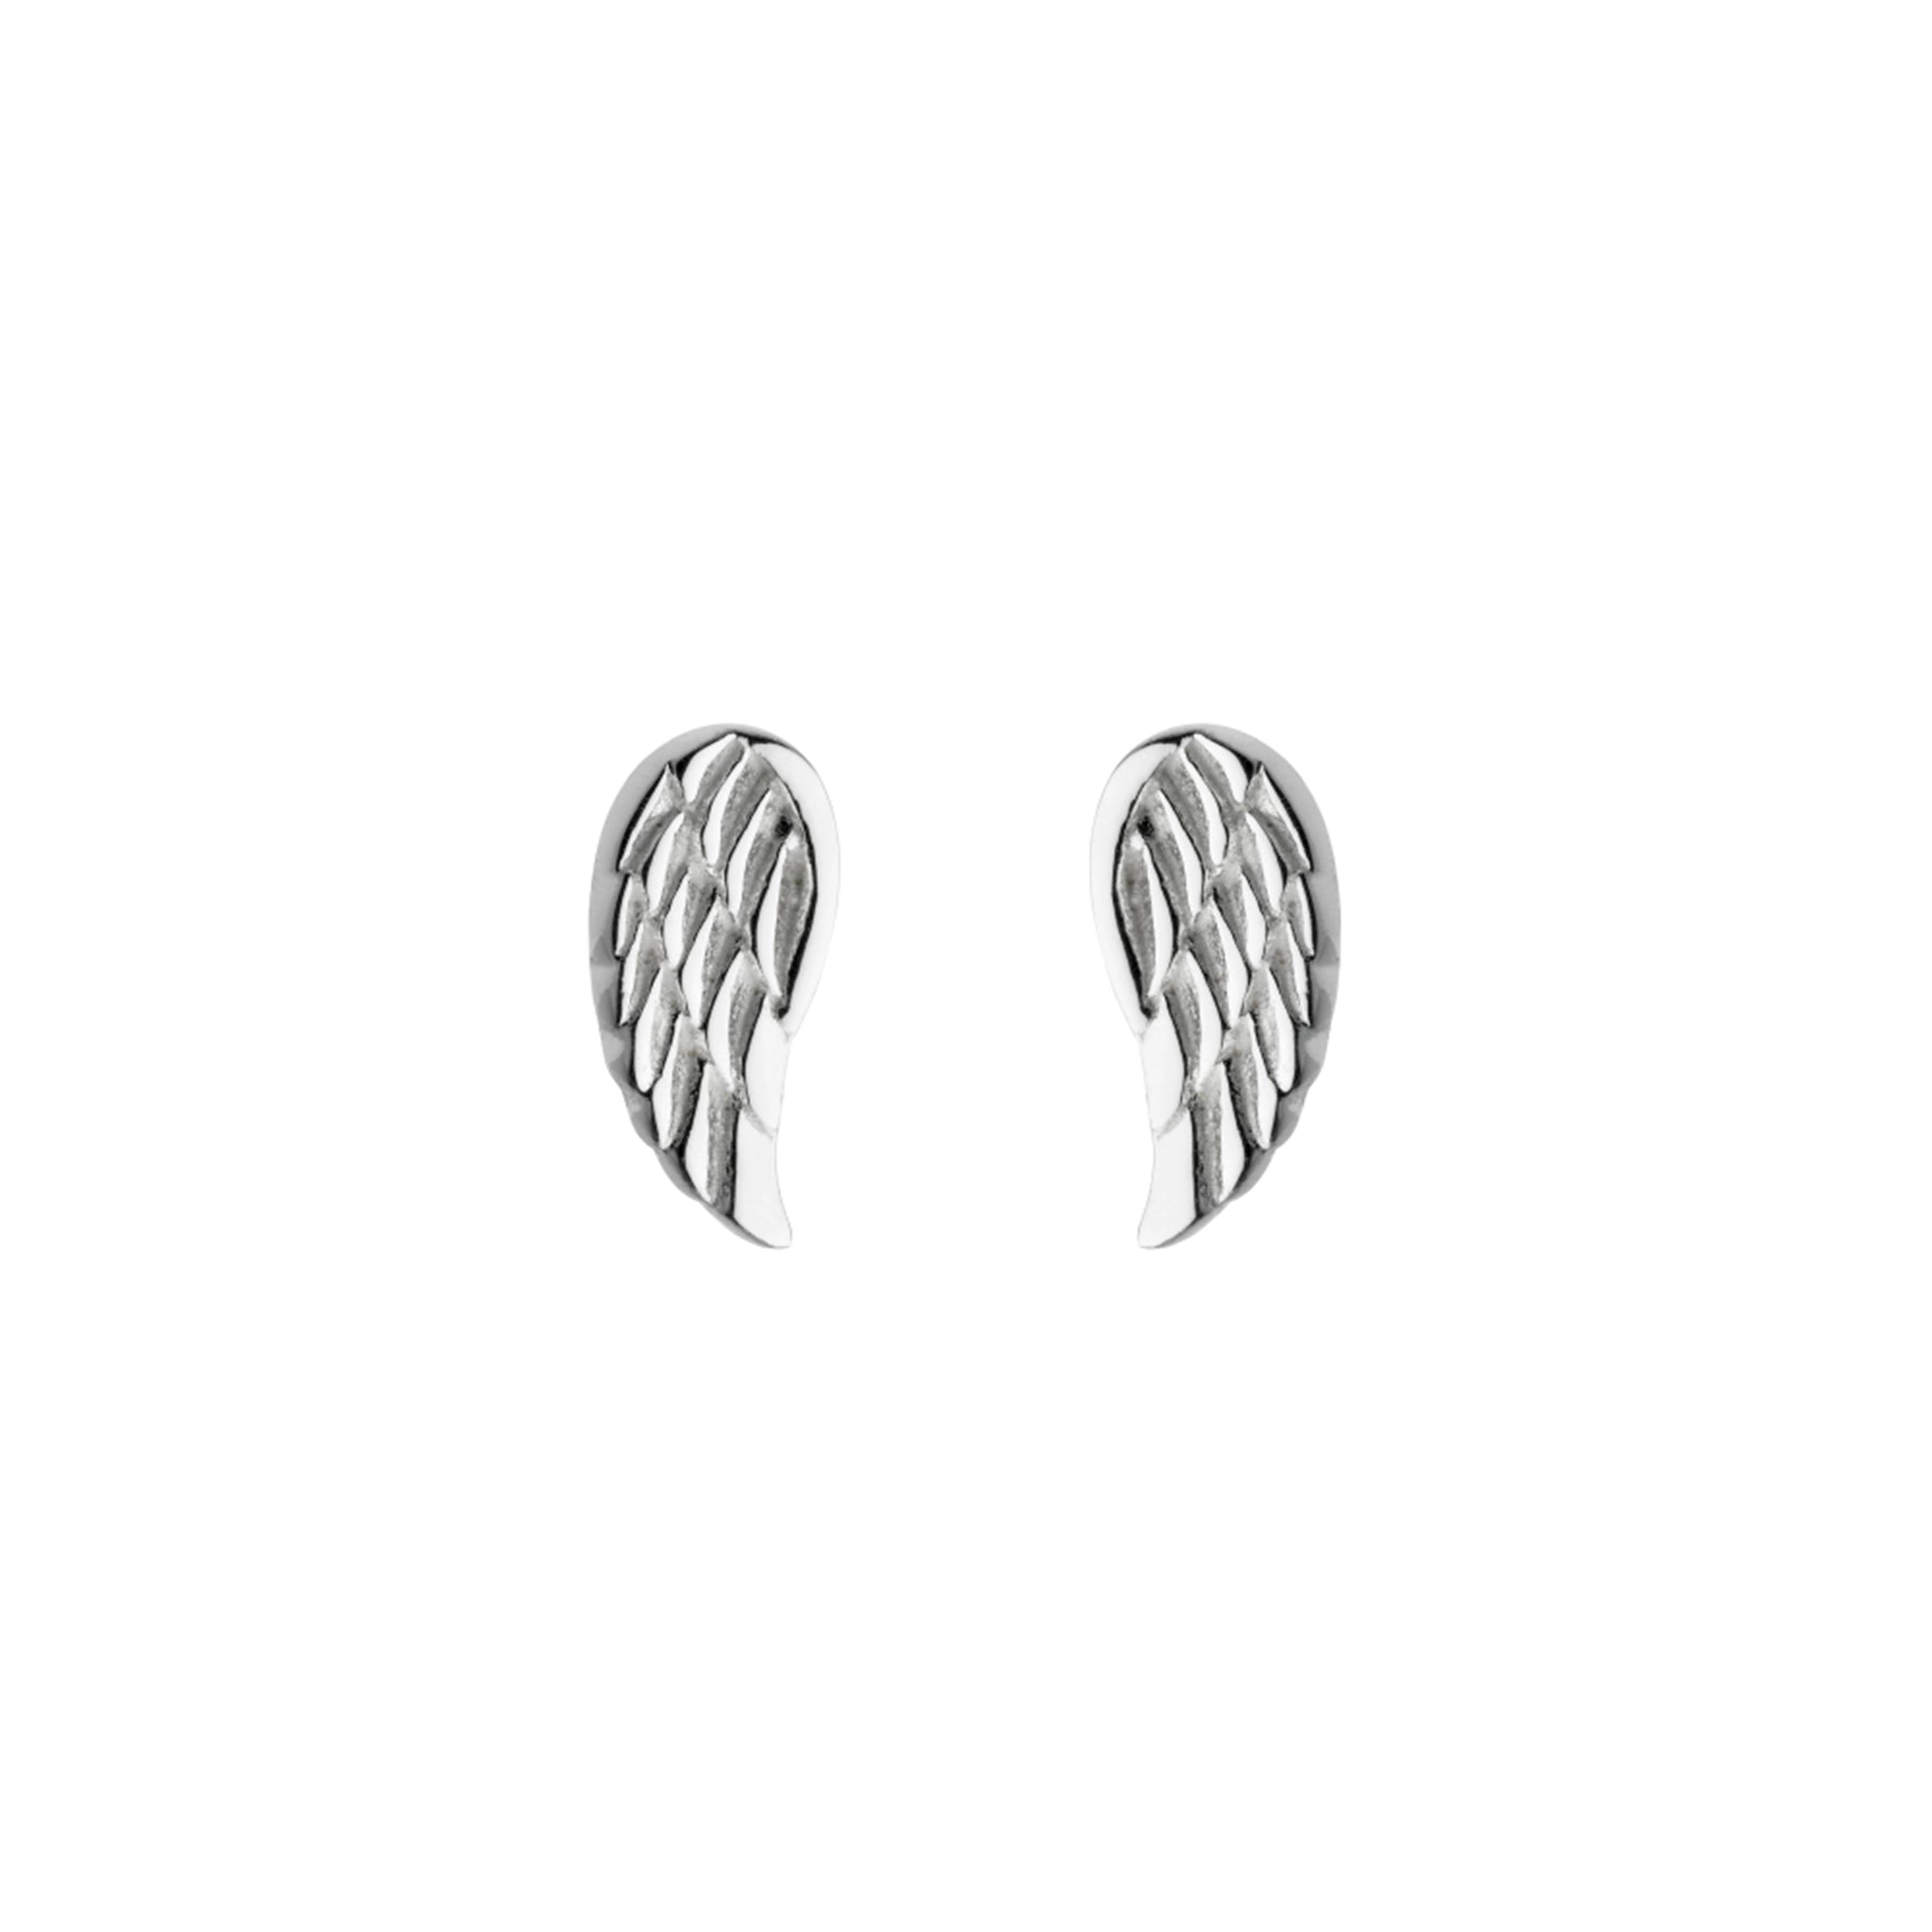 A pair of silver stud earrings shaped like feathered wings